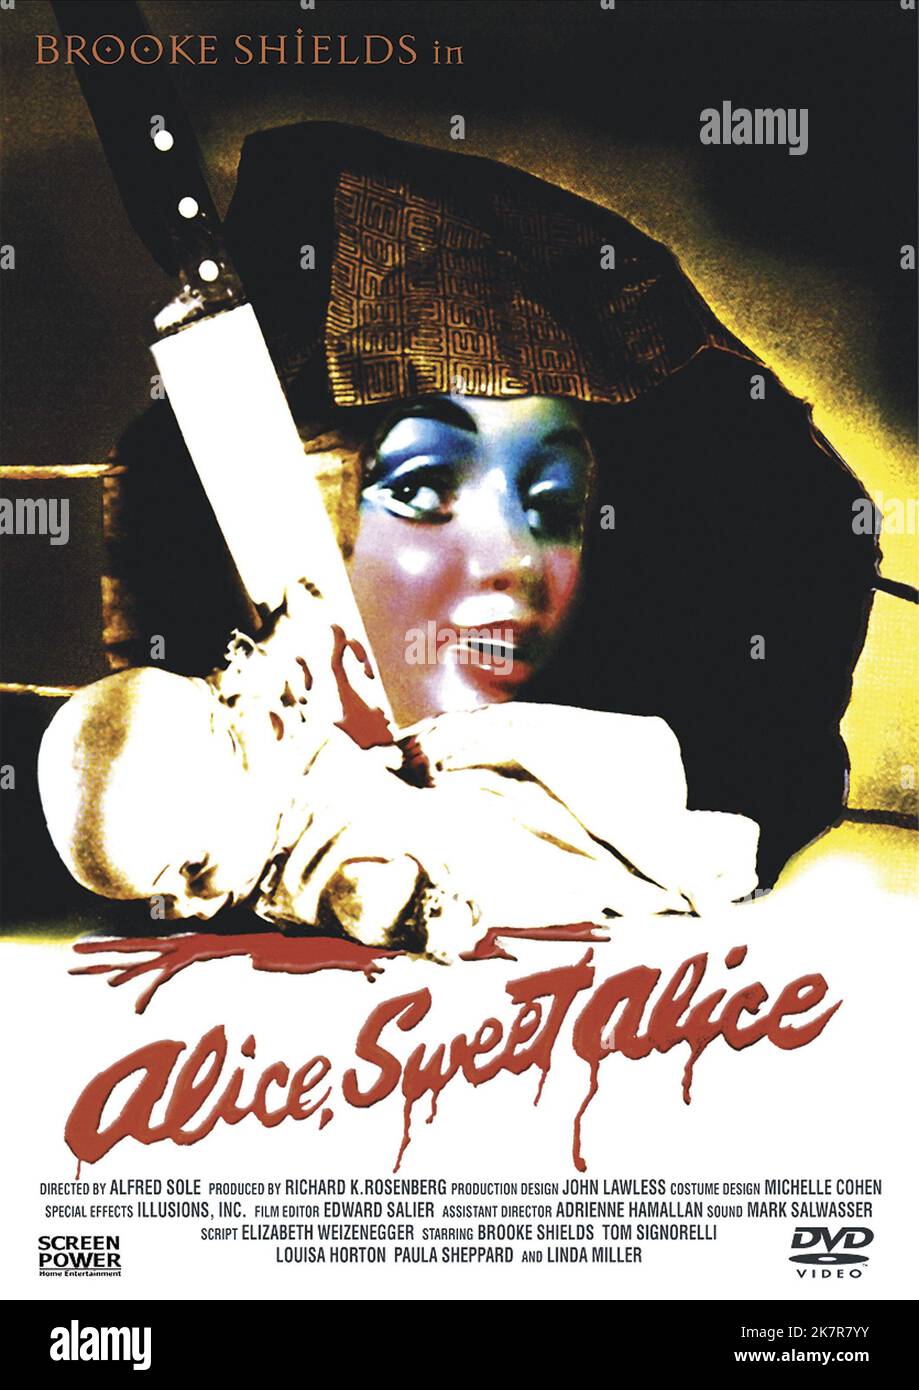 https://c8.alamy.com/comp/2K7R7YY/movie-poster-film-alice-sweet-alice-1970-director-alfred-sole-13-november-1976-warning-this-photograph-is-for-editorial-use-only-and-is-the-copyright-of-harristown-funding-andor-the-photographer-assigned-by-the-film-or-production-company-and-can-only-be-reproduced-by-publications-in-conjunction-with-the-promotion-of-the-above-film-a-mandatory-credit-to-harristown-funding-is-required-the-photographer-should-also-be-credited-when-known-no-commercial-use-can-be-granted-without-written-authority-from-the-film-company-2K7R7YY.jpg